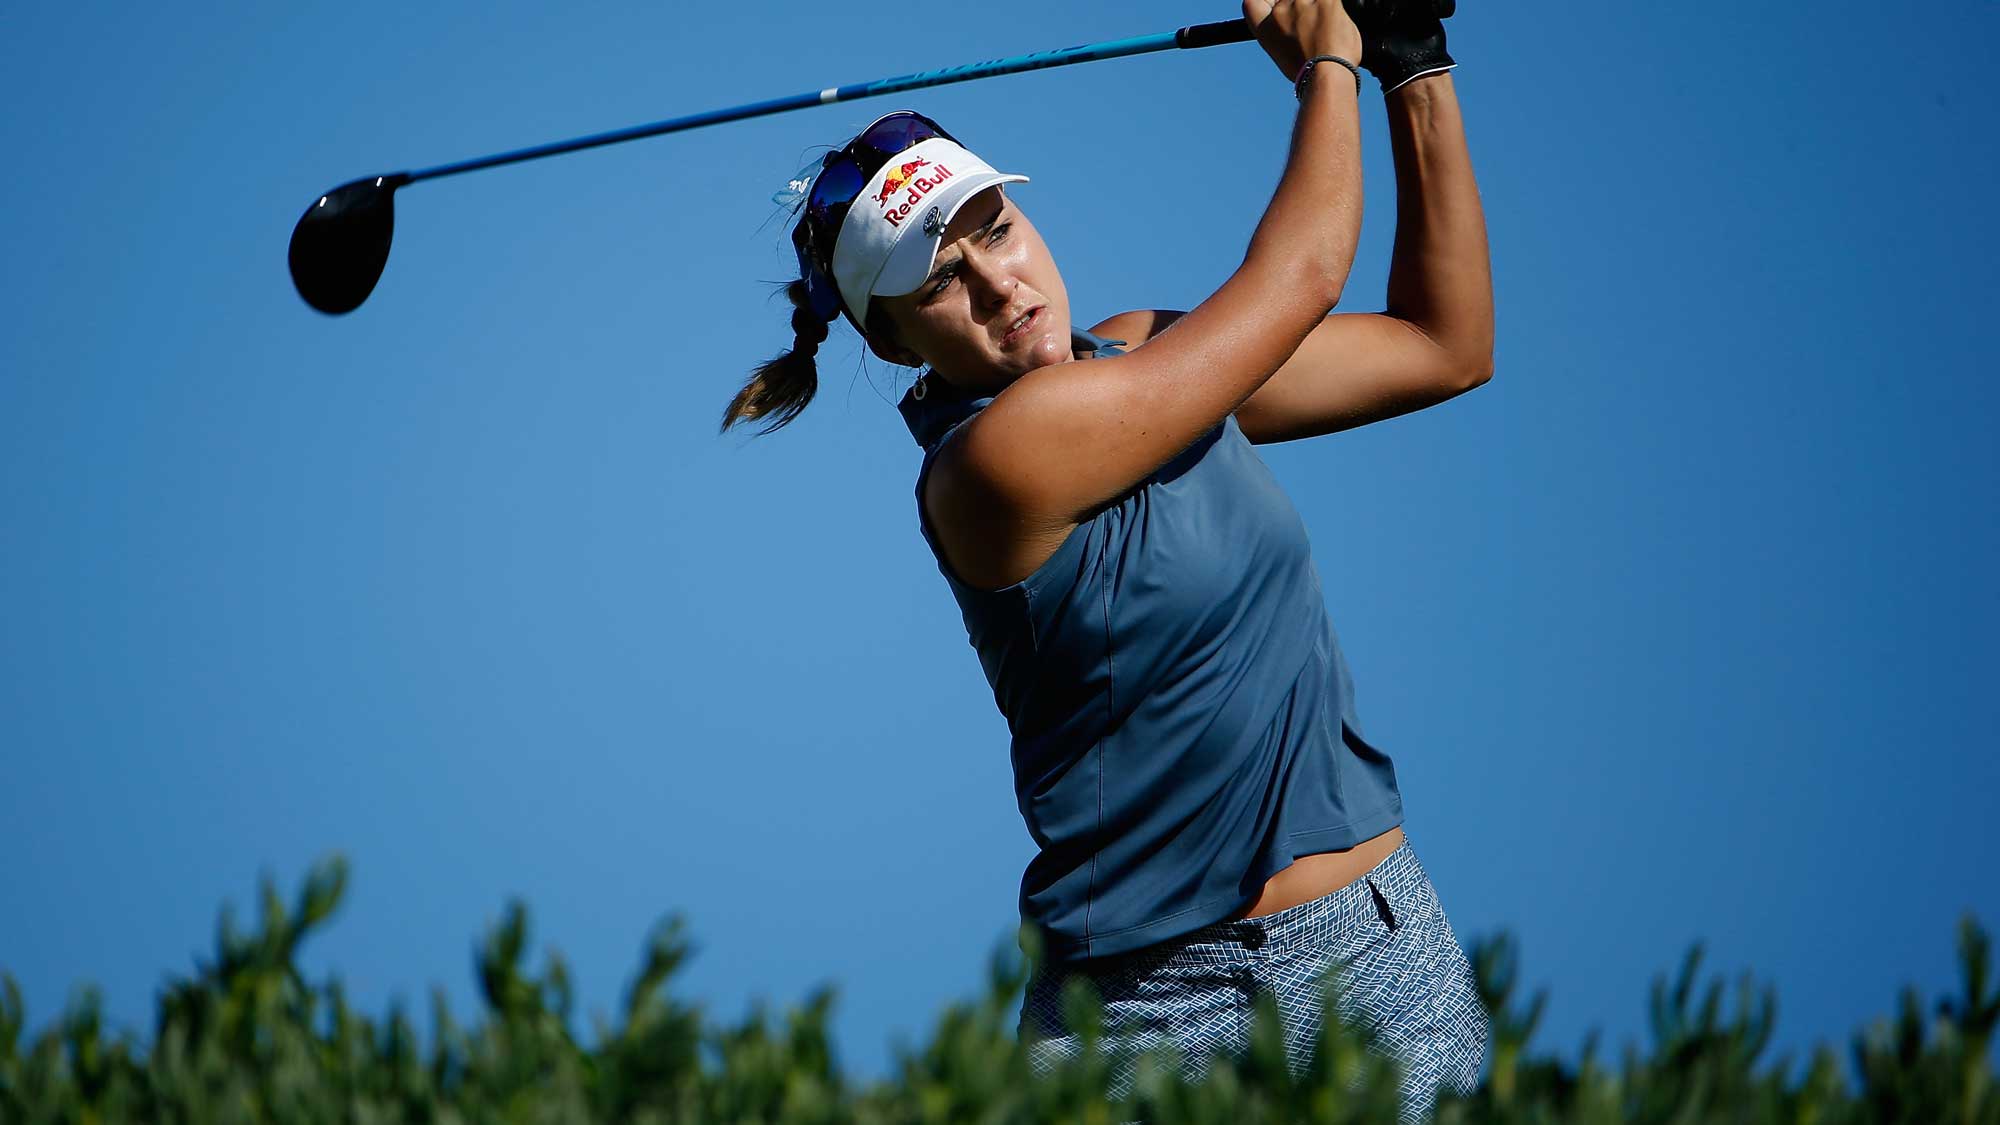 Lexi Thompson plays a tee shot on the 13th hole during the second round of the LPGA LOTTE Championship 